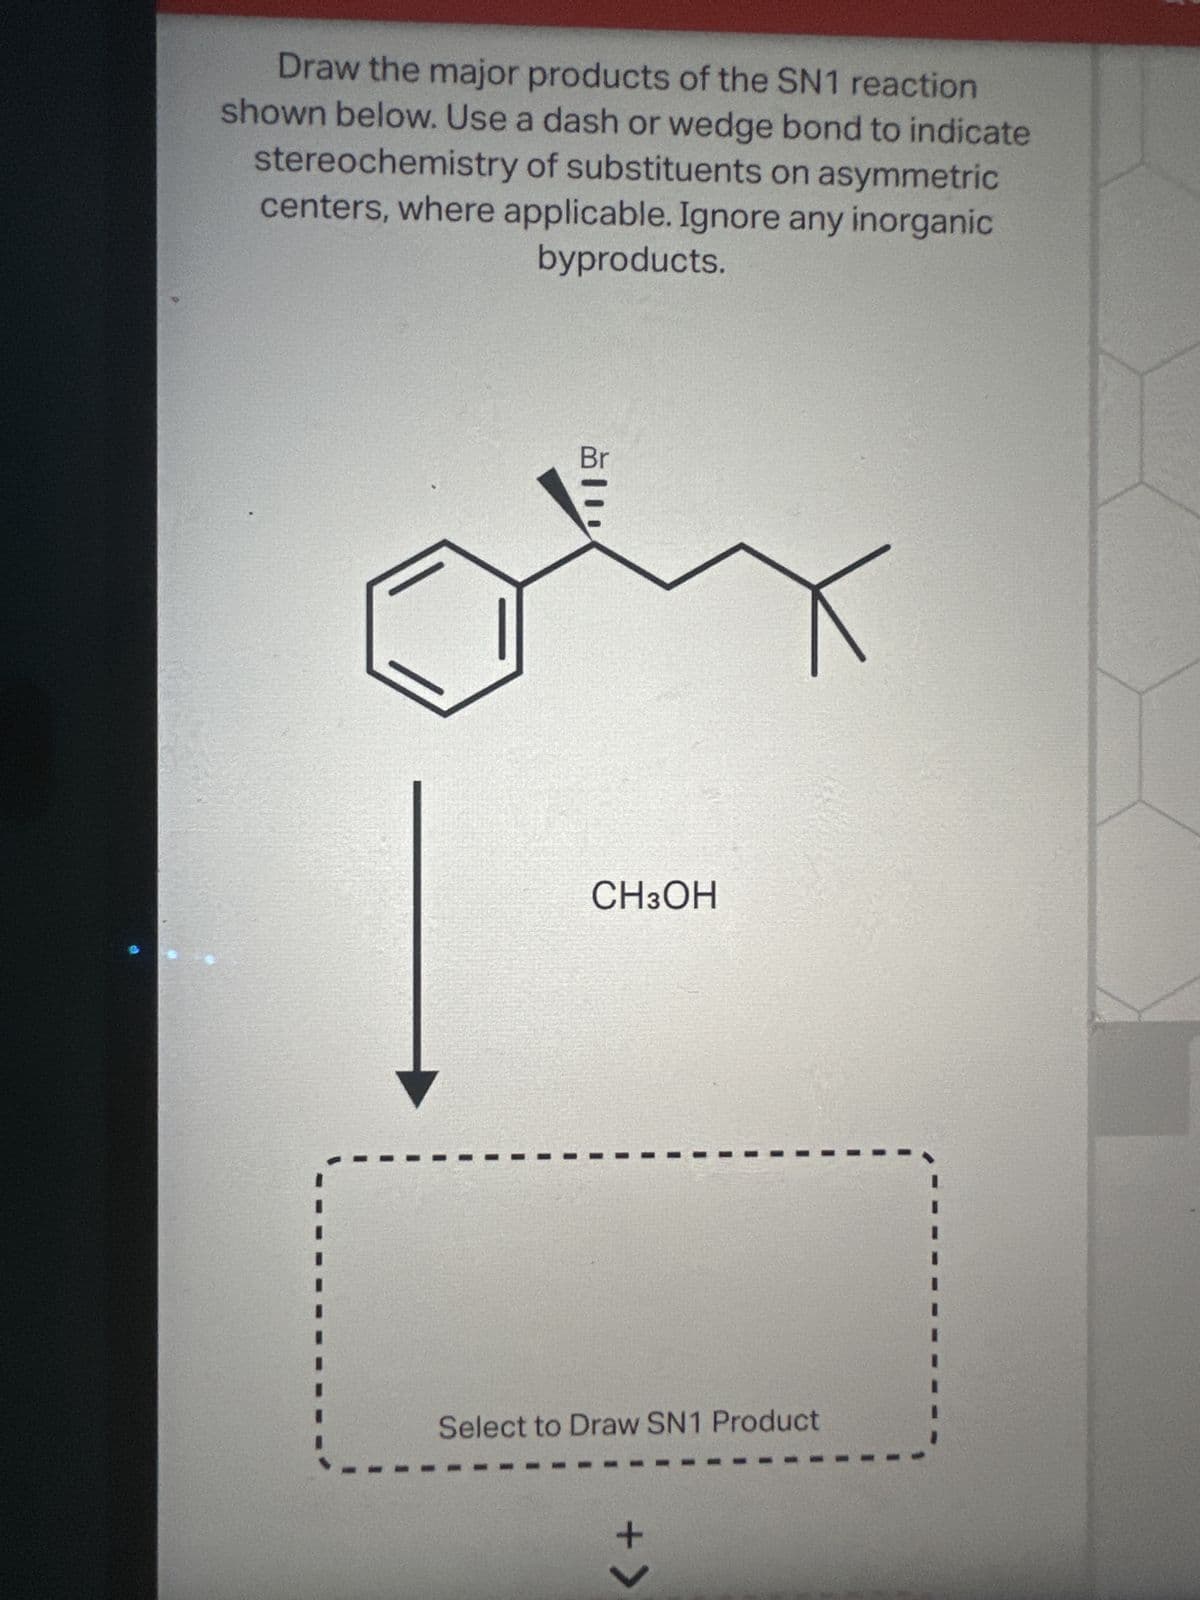 Draw the major products of the SN1 reaction
shown below. Use a dash or wedge bond to indicate
stereochemistry of substituents on asymmetric
centers, where applicable. Ignore any inorganic
byproducts.
Br
CH3OH
Select to Draw SN1 Product
+ >